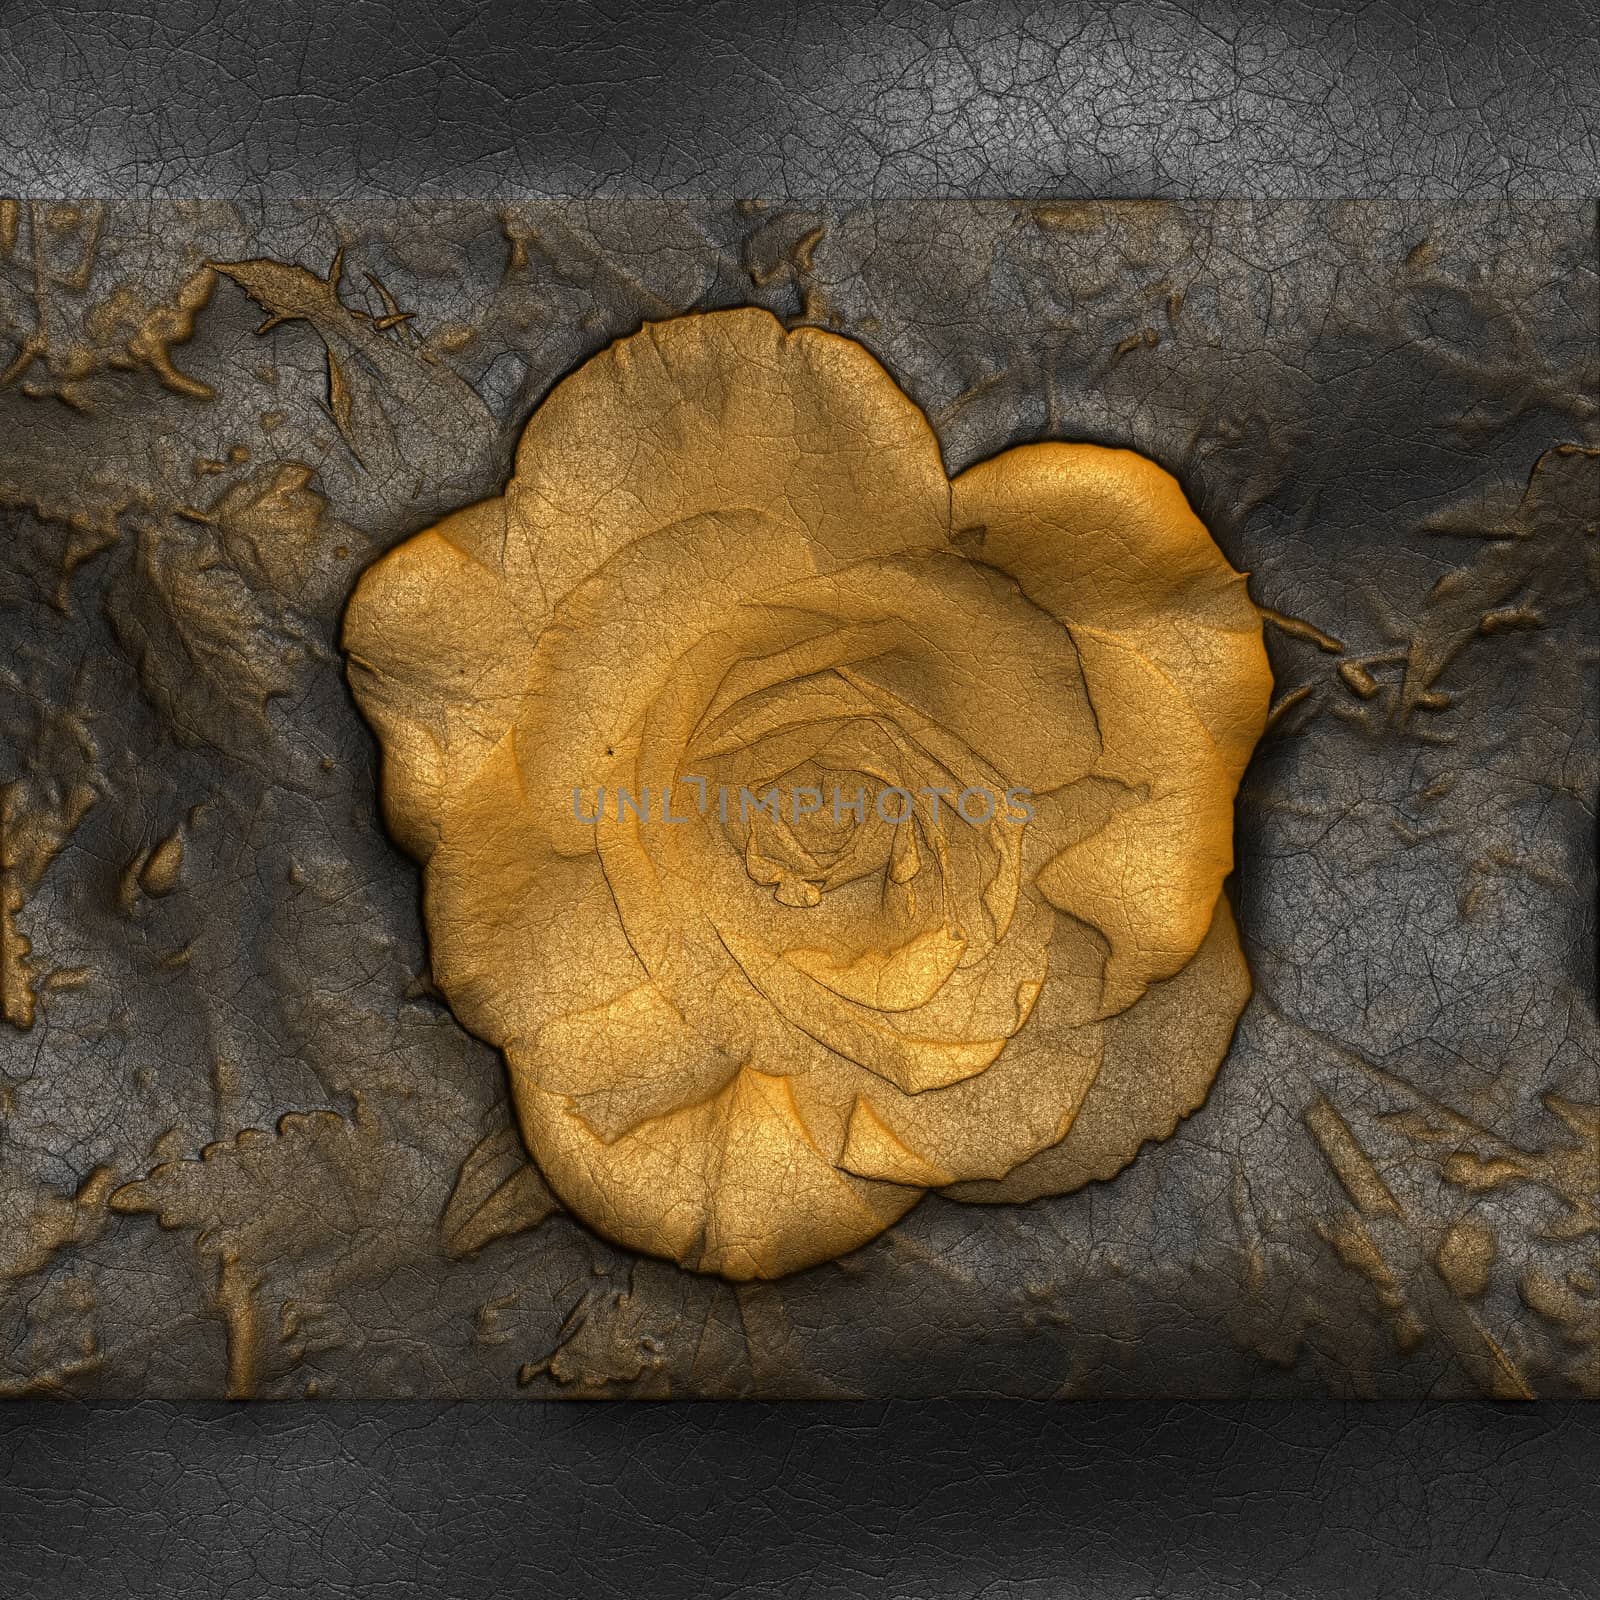 Flower background leather tile by stocklady